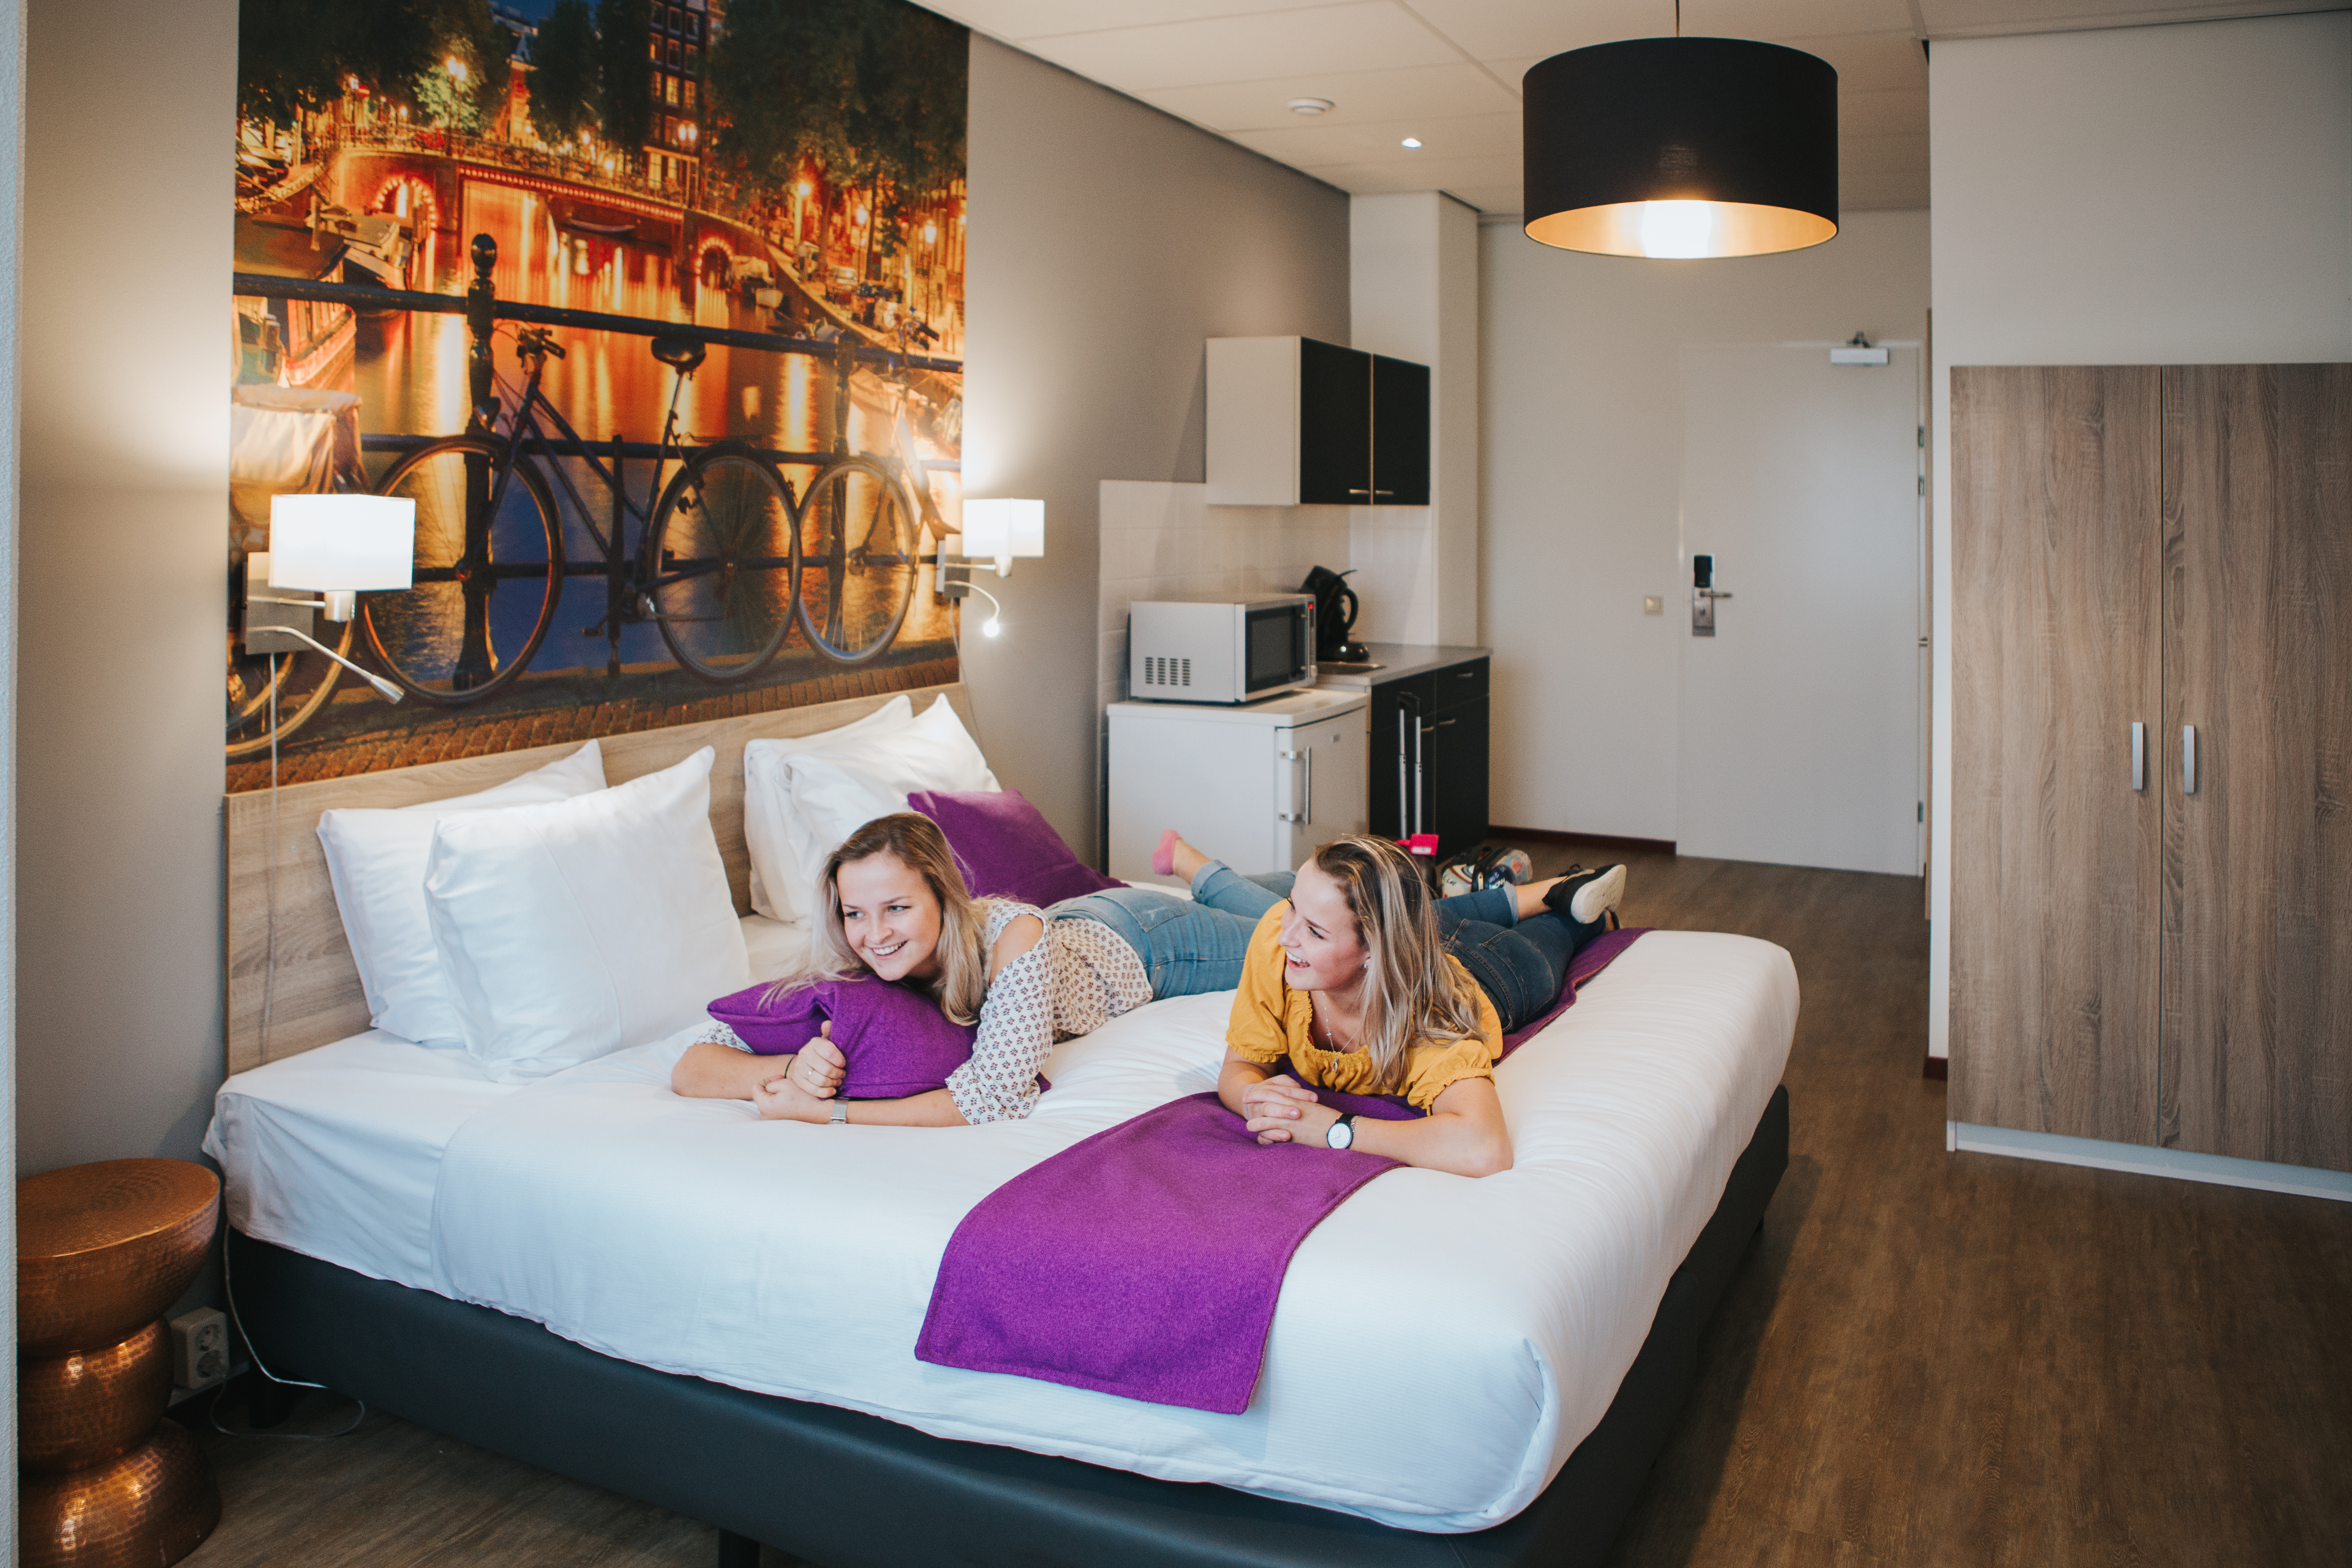 Amsterdam Teleport Hotel <br/>59.04 ew <br/> <a href='http://vakantieoplossing.nl/outpage/?id=269423dfed5b67d2f485ba22665cb3fa' target='_blank'>View Details</a>